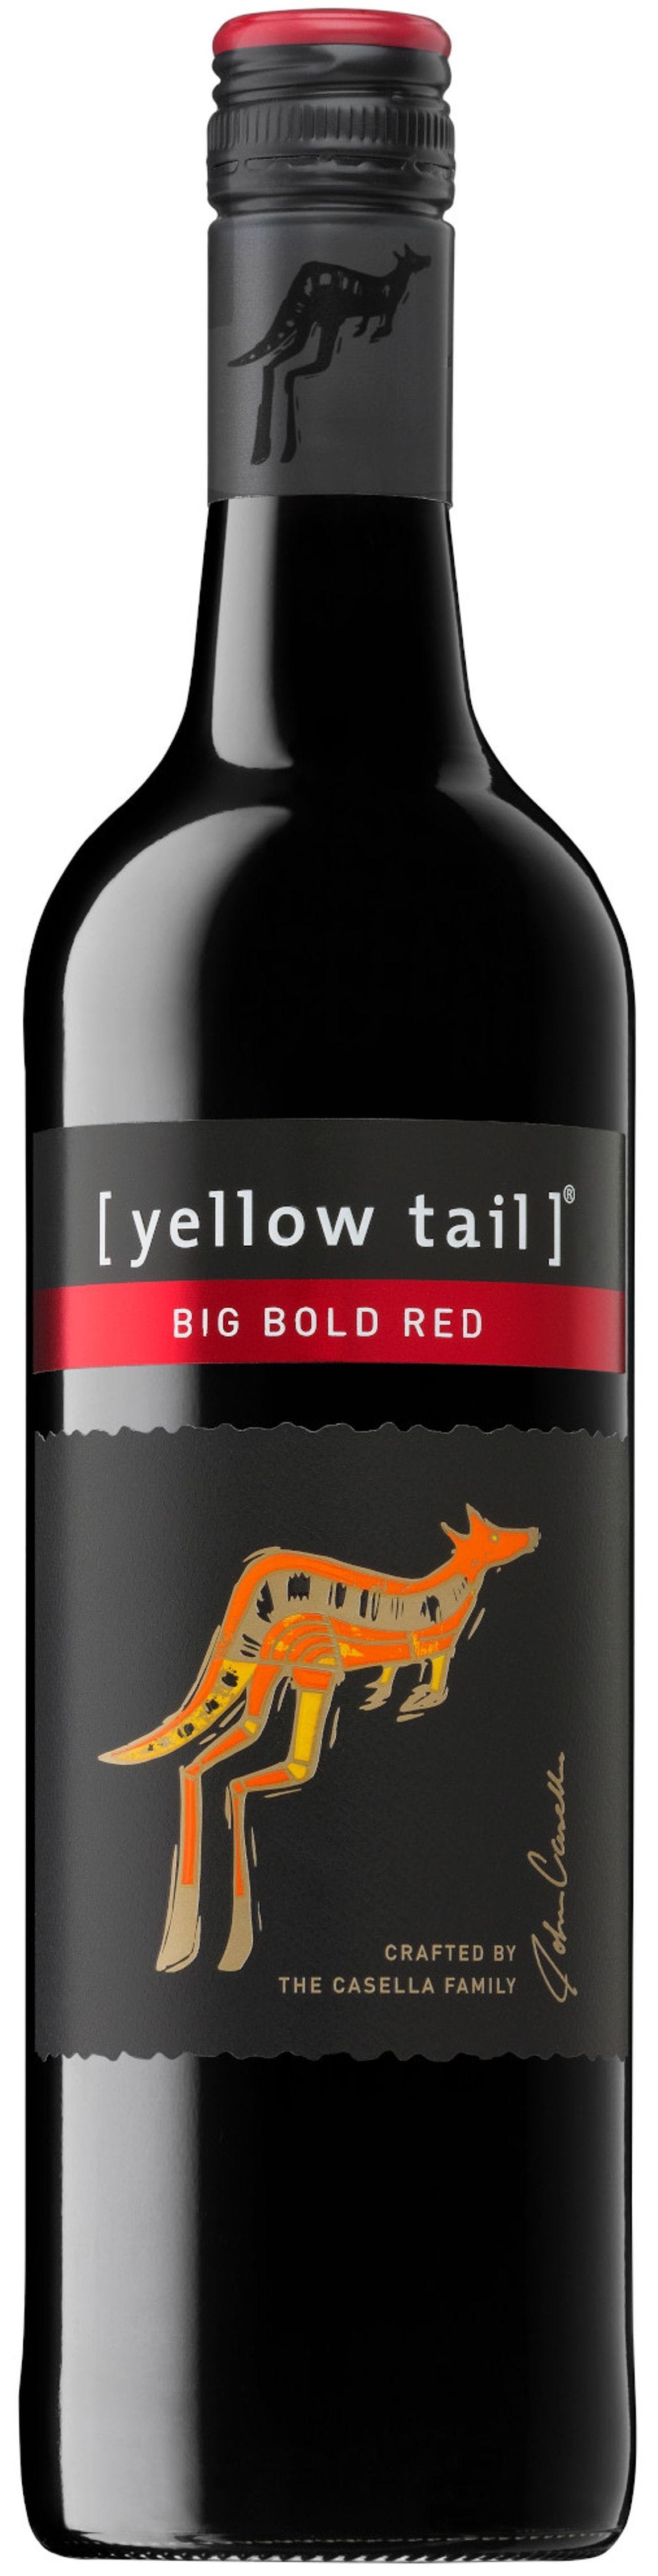 images/wine/Red Wine/Yellow Tail Big Bold Red 750ml.jpg